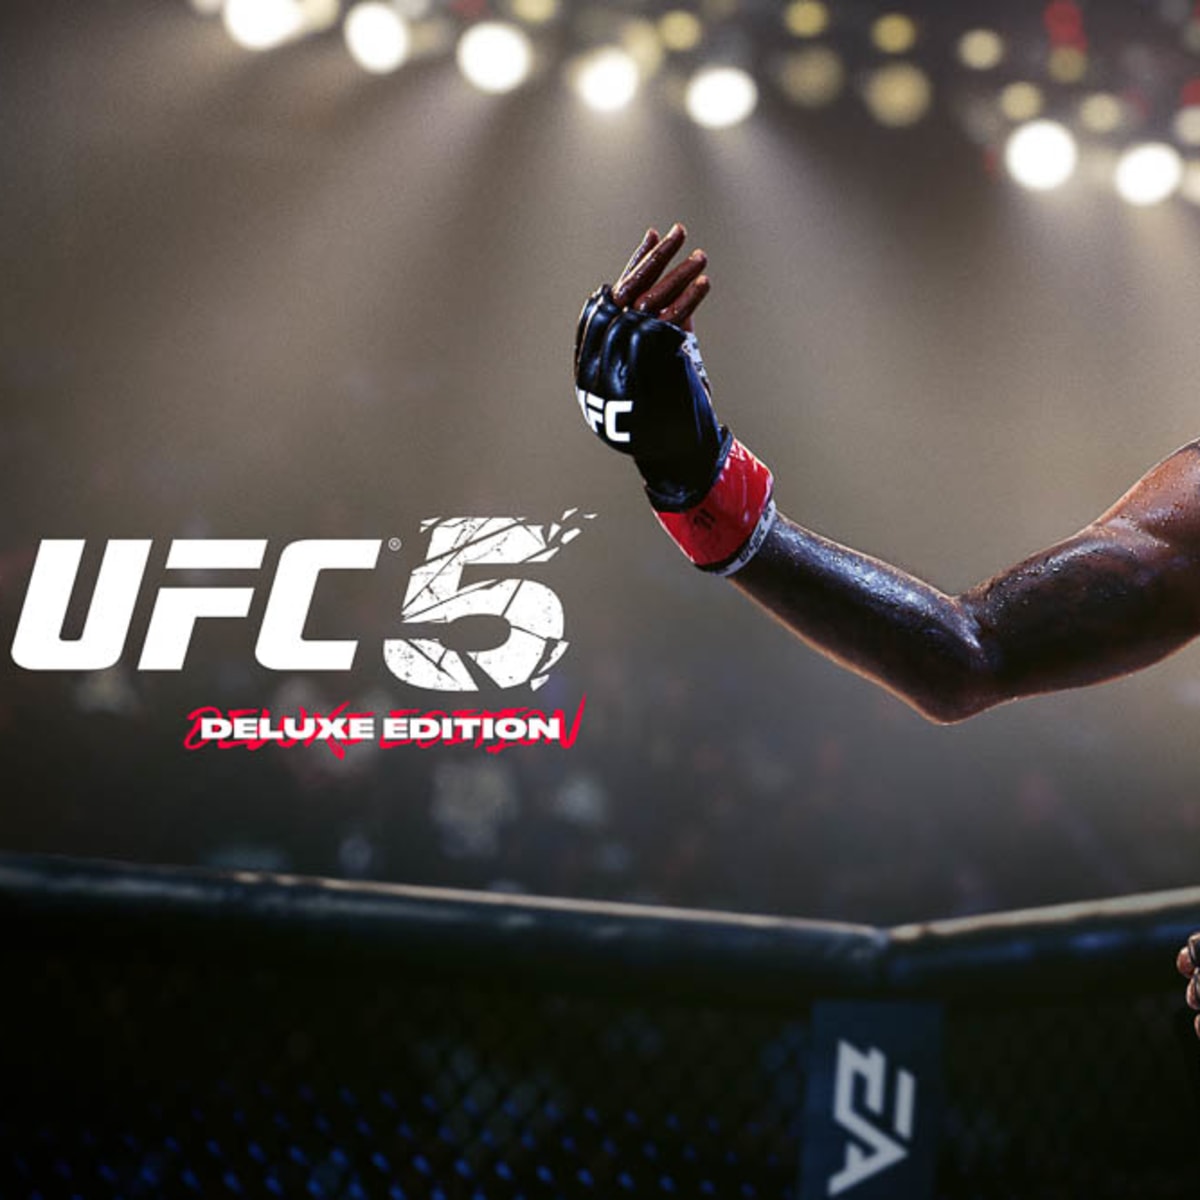 EA Sports UFC 5 arrives October 27: Feel the fight with visceral gameplay and graphics powered